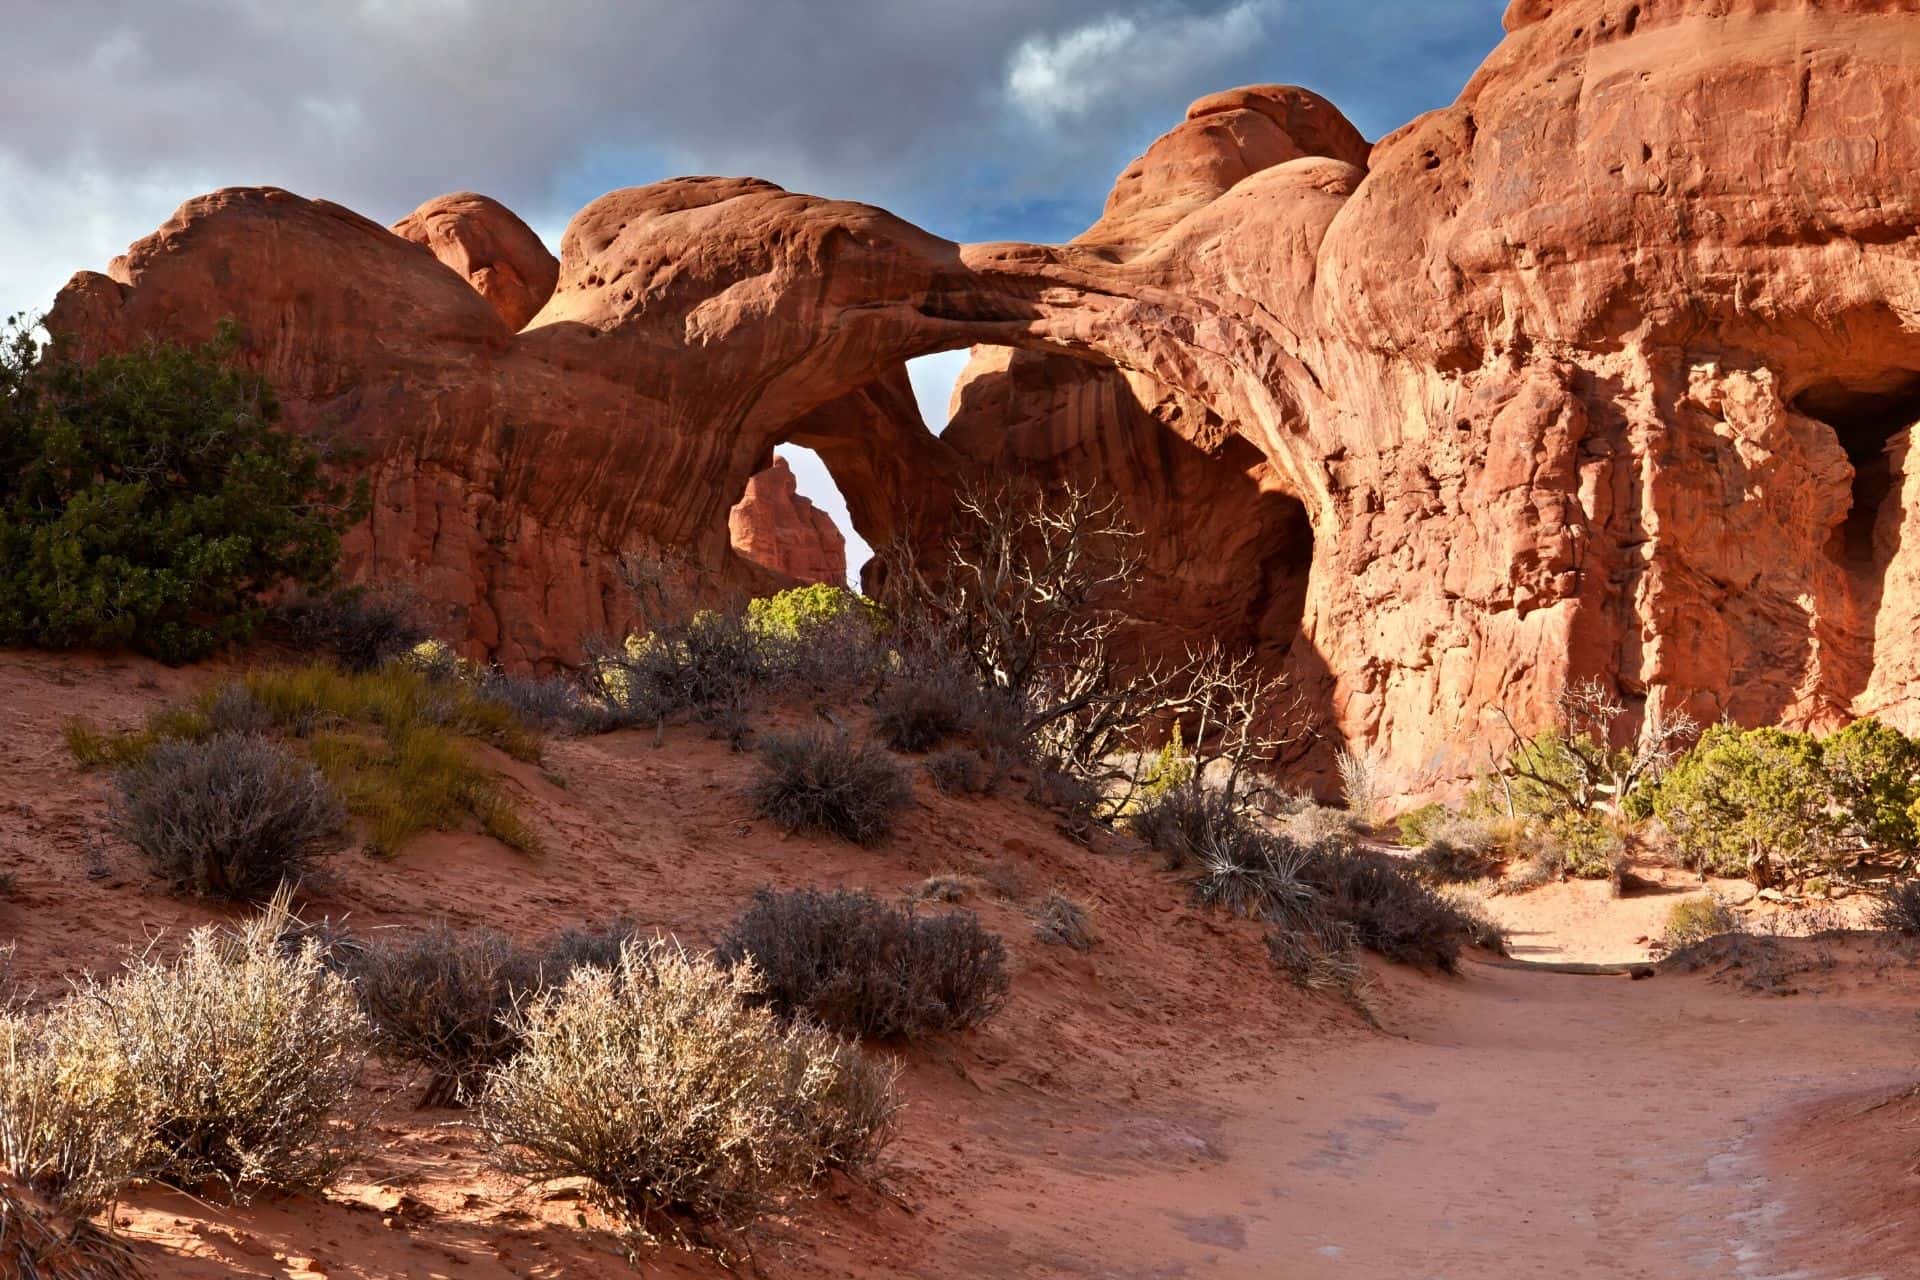 First Visit to Arches National Park